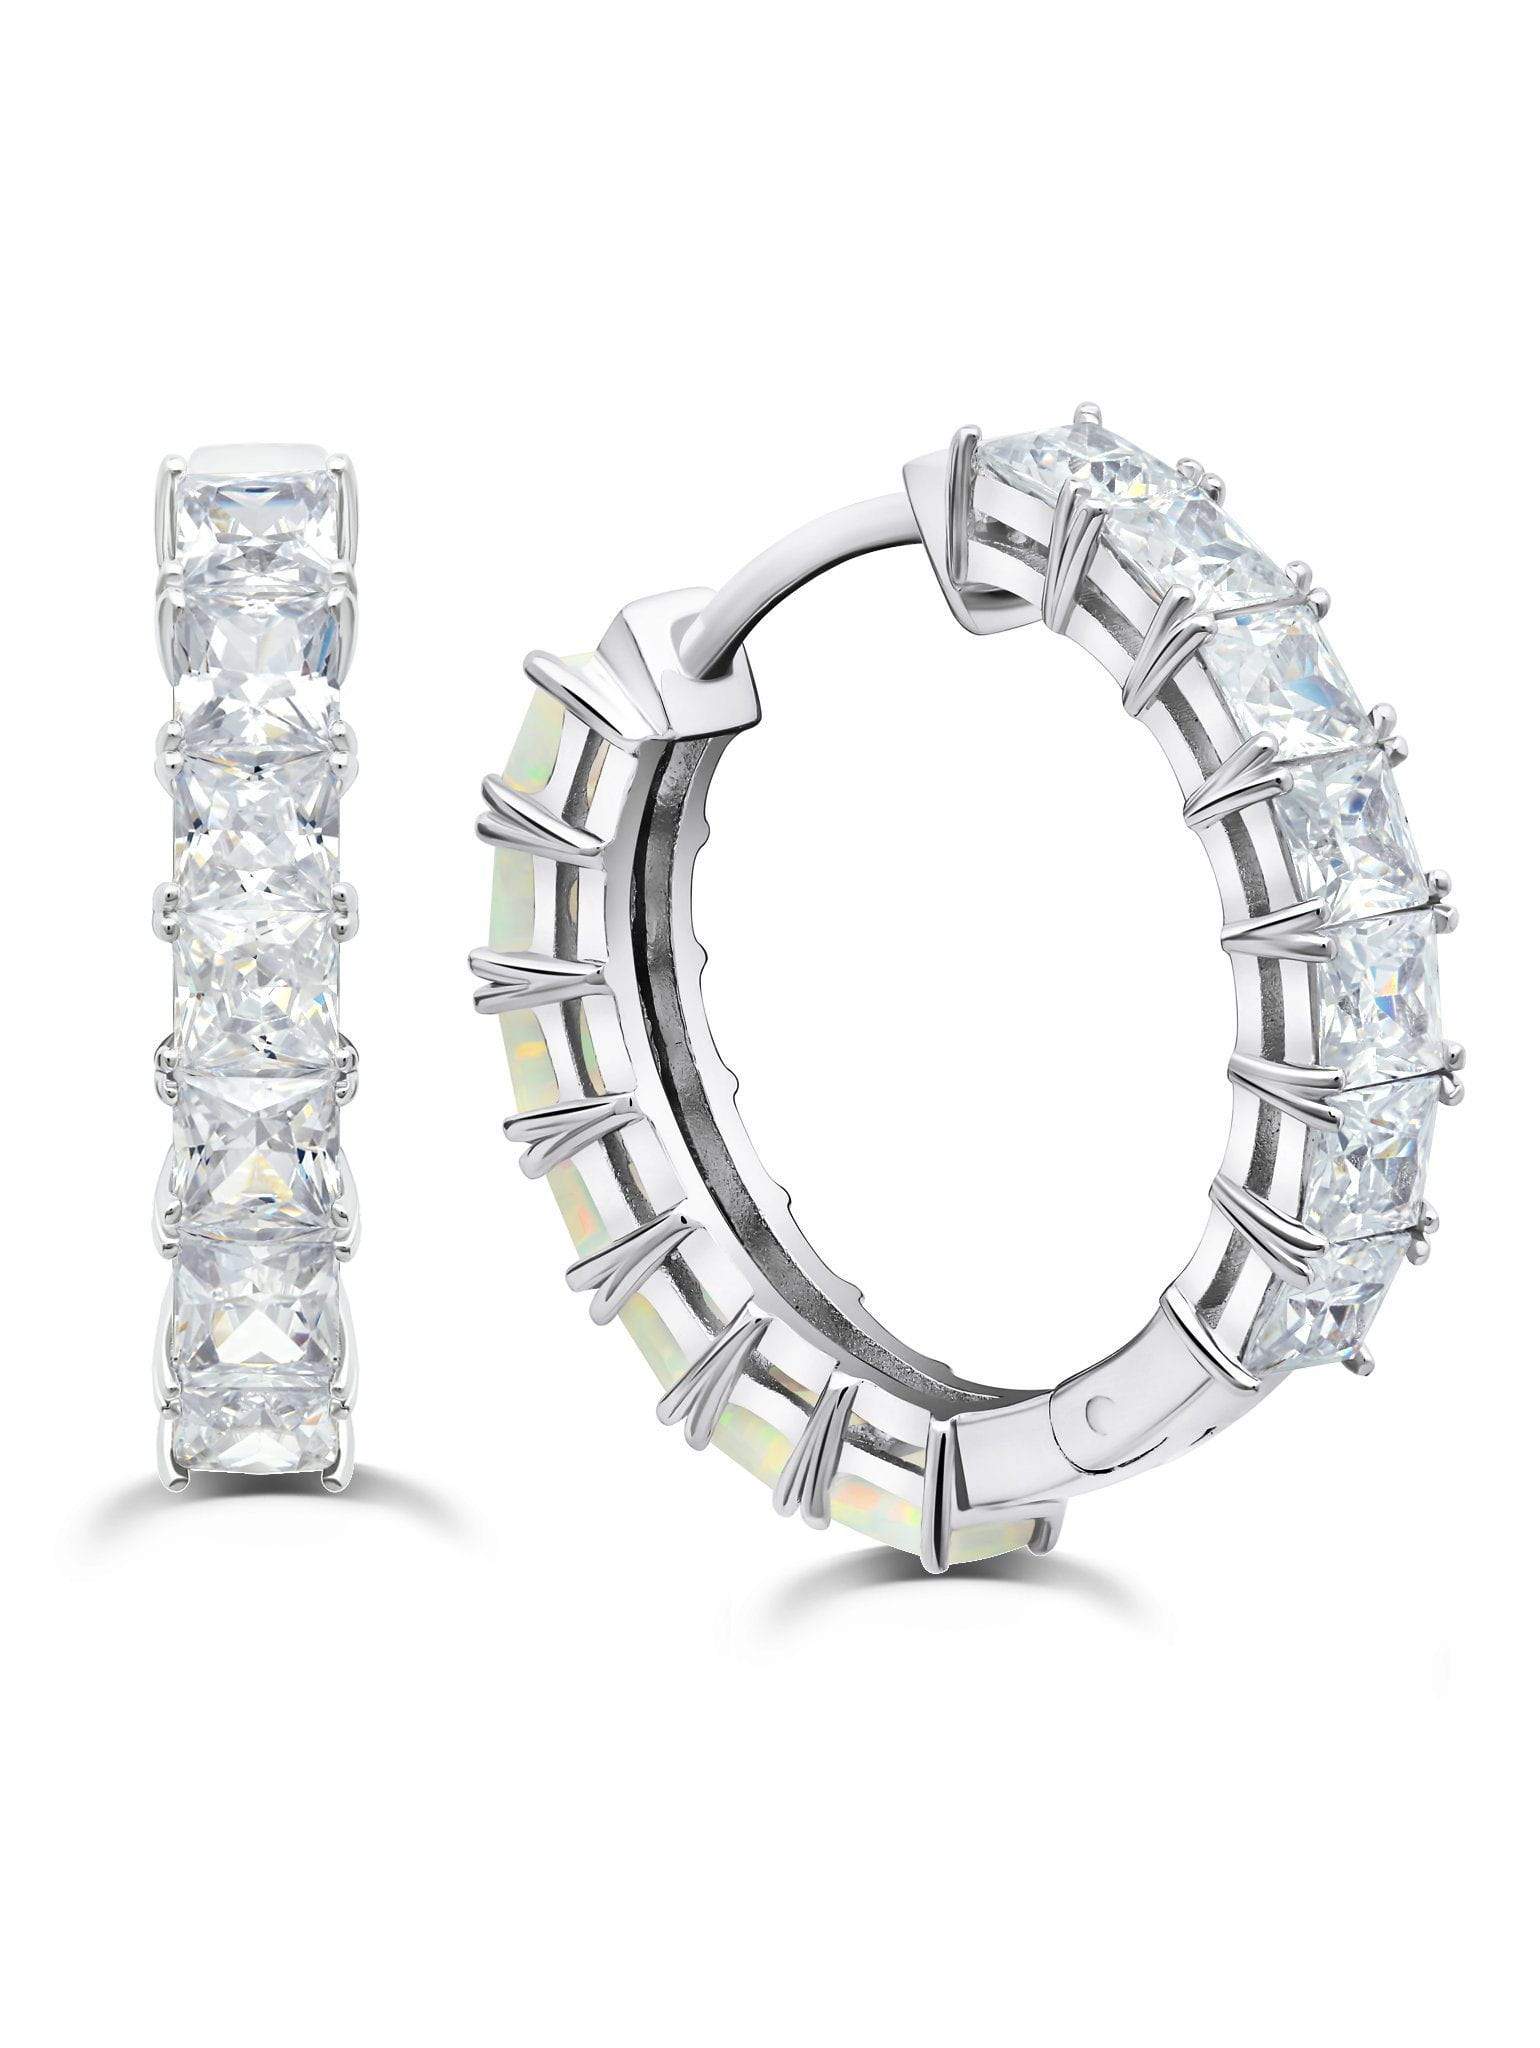 Crislu Jewelry Crislu Duo Hoops finished in Pure Platinum - 22 mm with Opal and Clear Stones